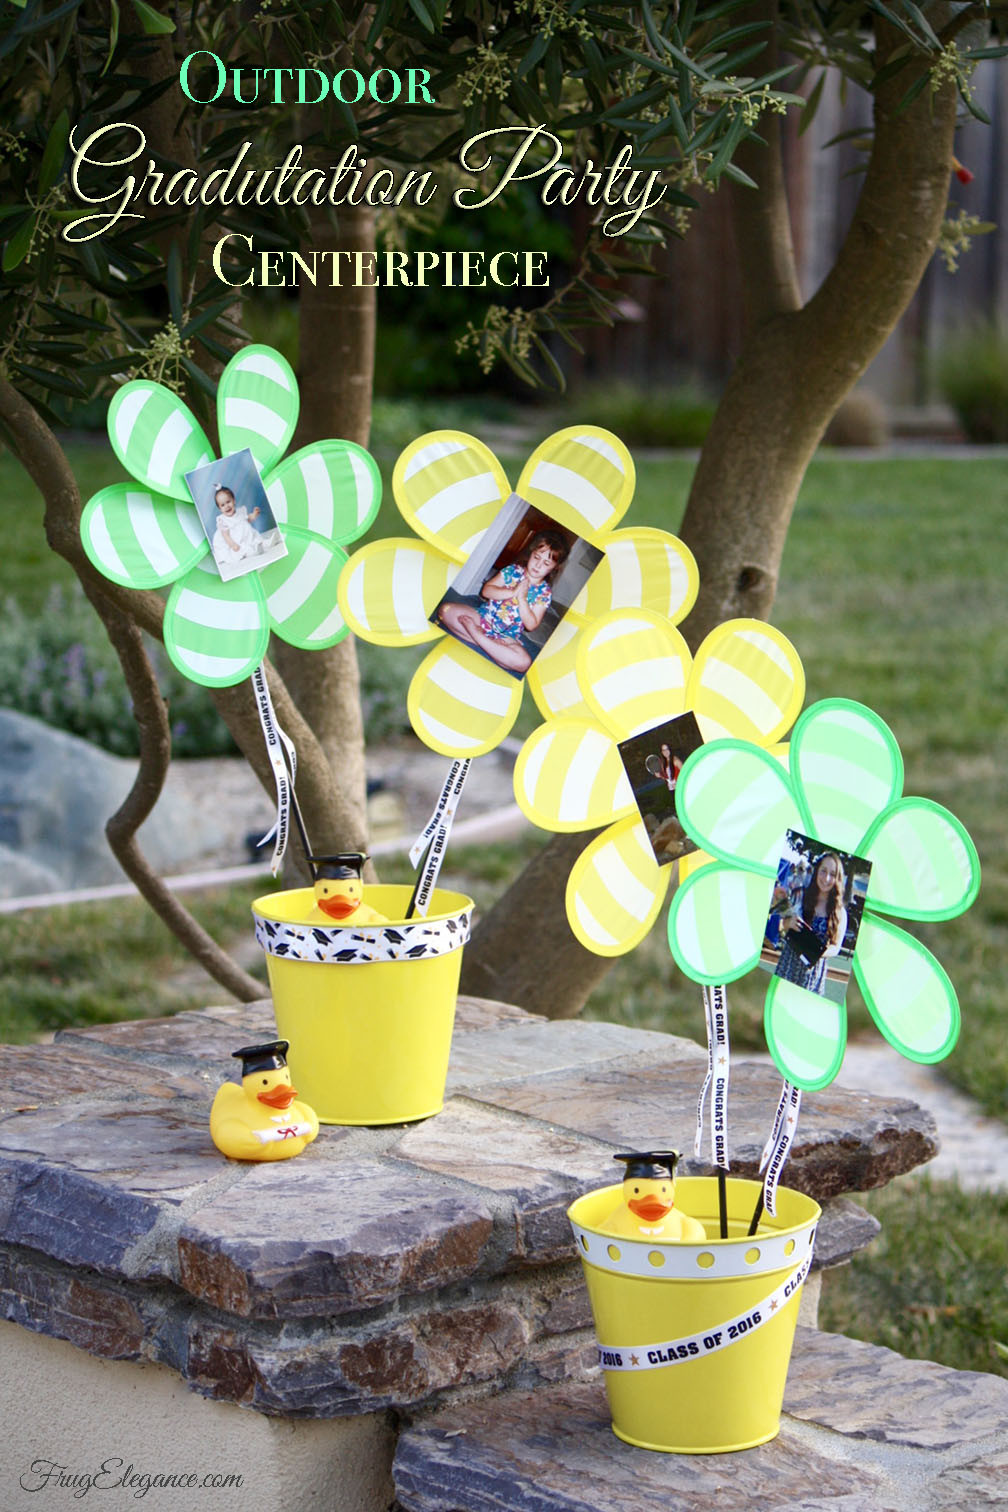 Ideas For Outside Graduation Party
 Outdoor Graduation Party Centerpiece FrugElegance